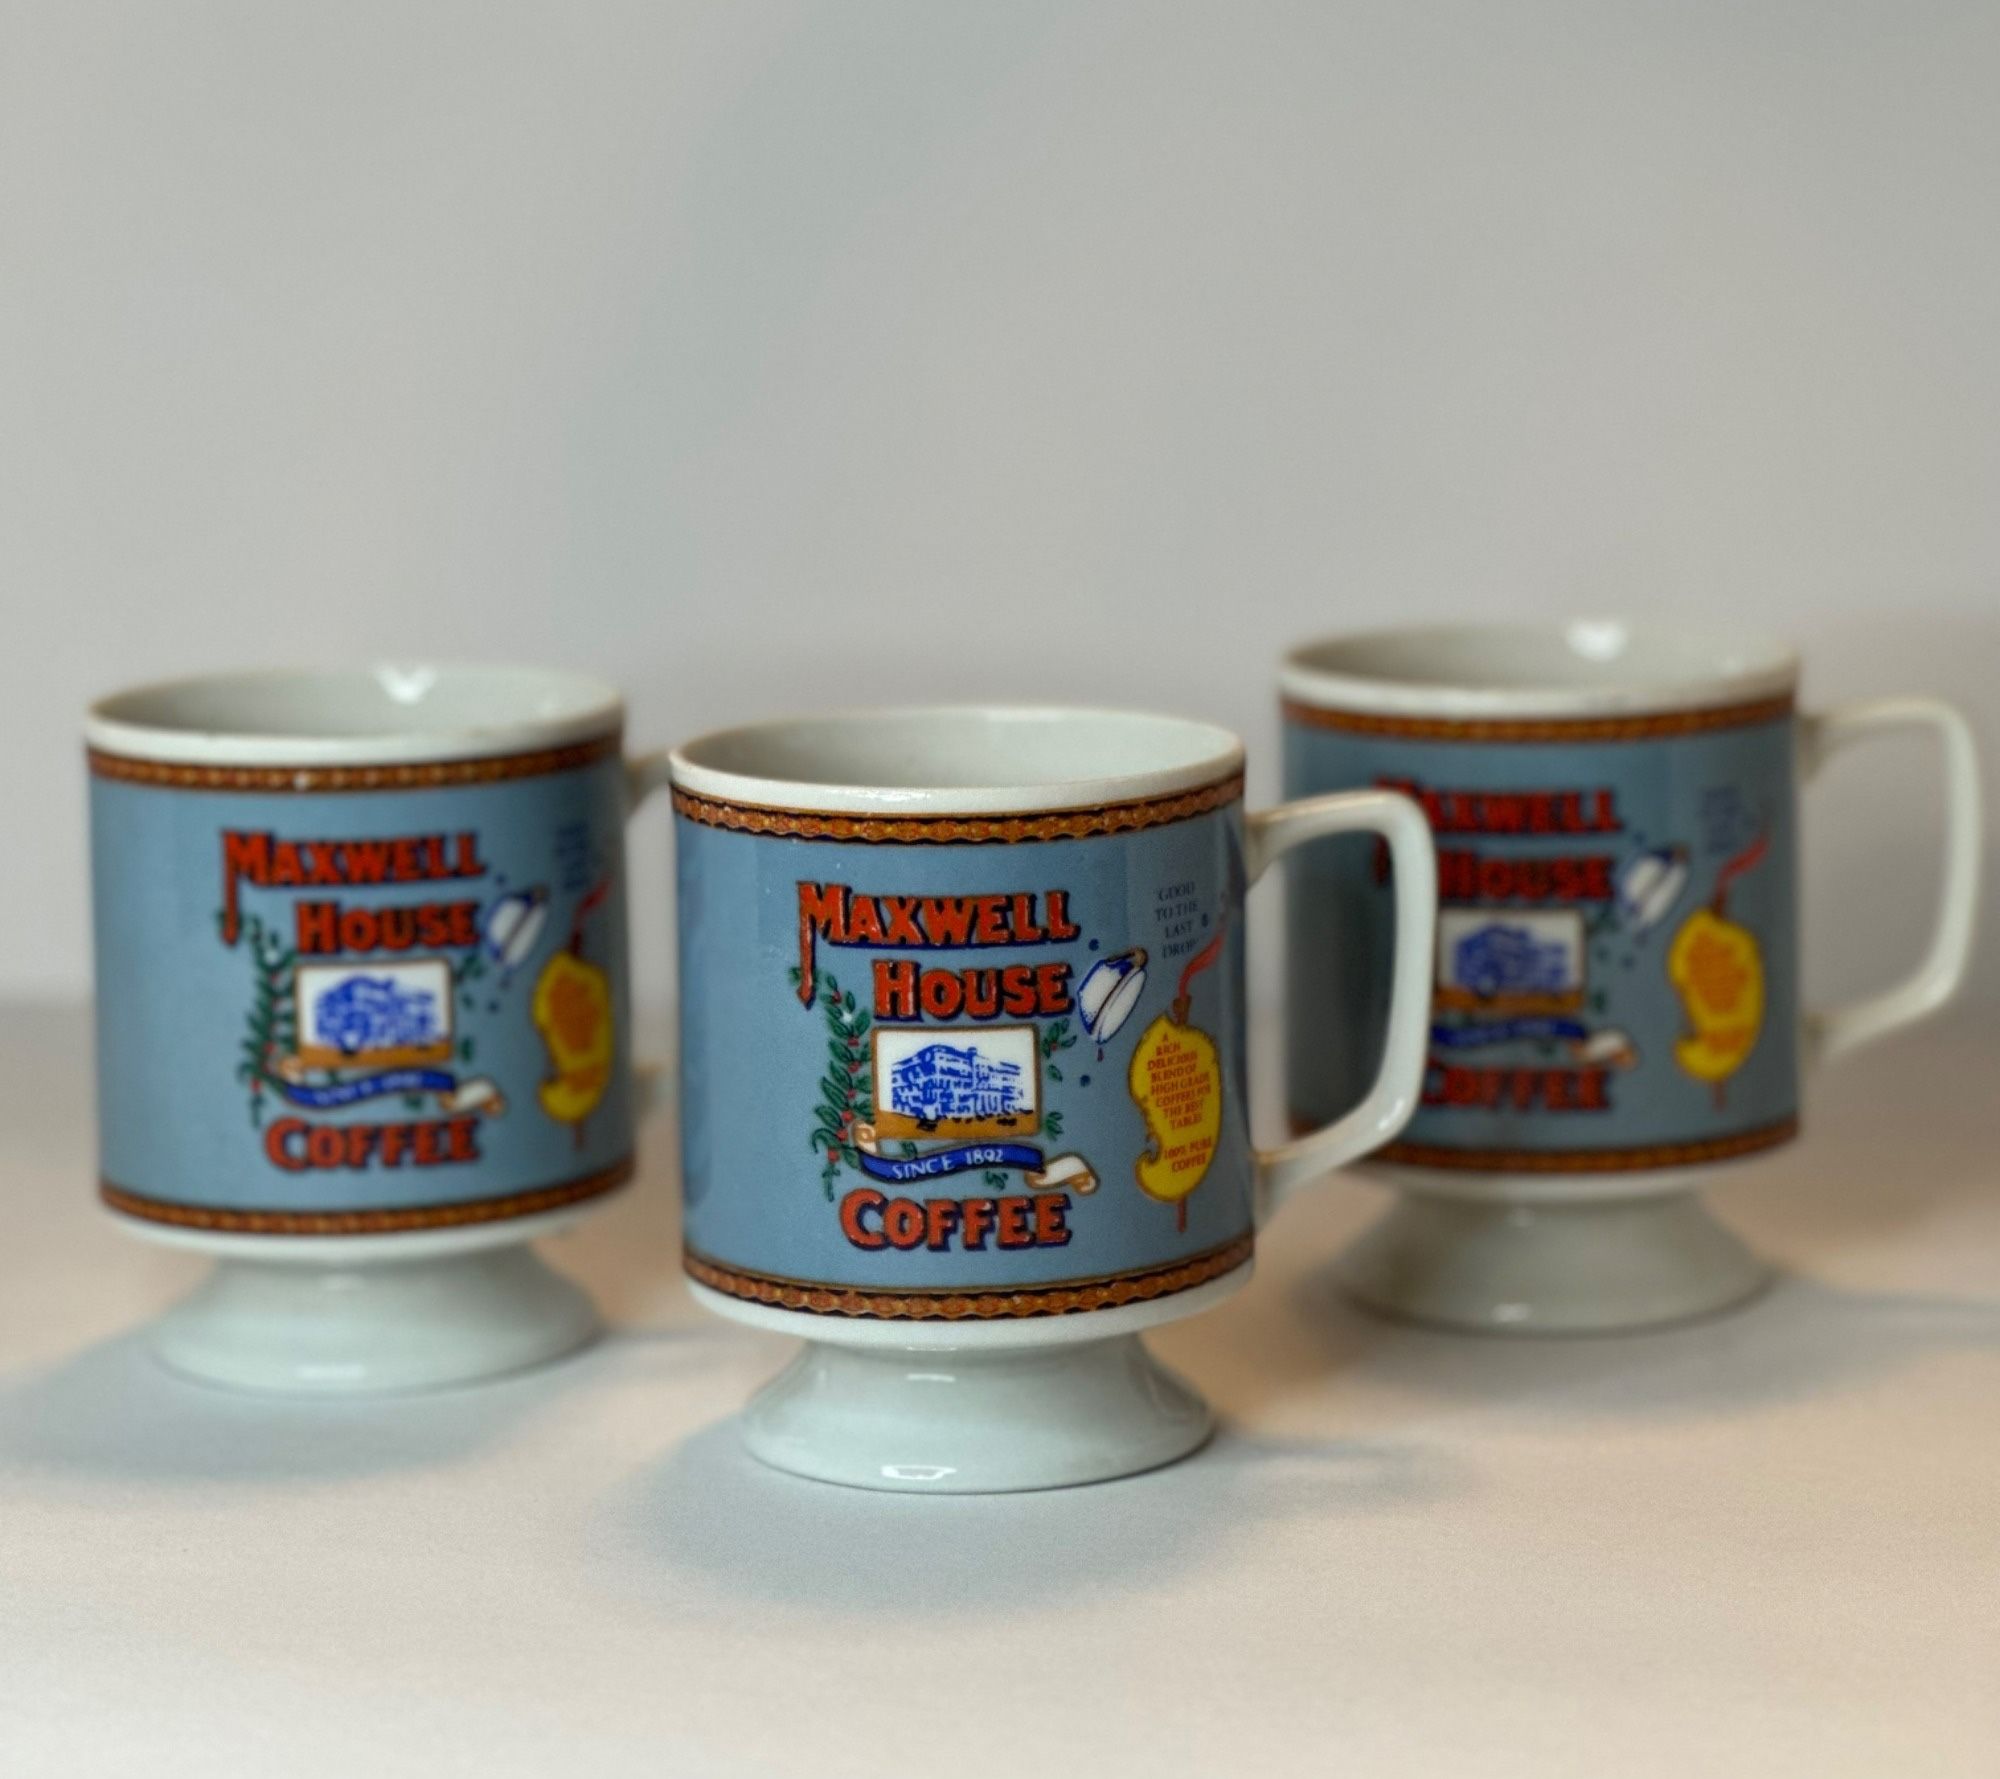 VTG Retro Set of 3 Footed Coffee Mugs Kitschy Maxwell House Ceramic Tea Cups  